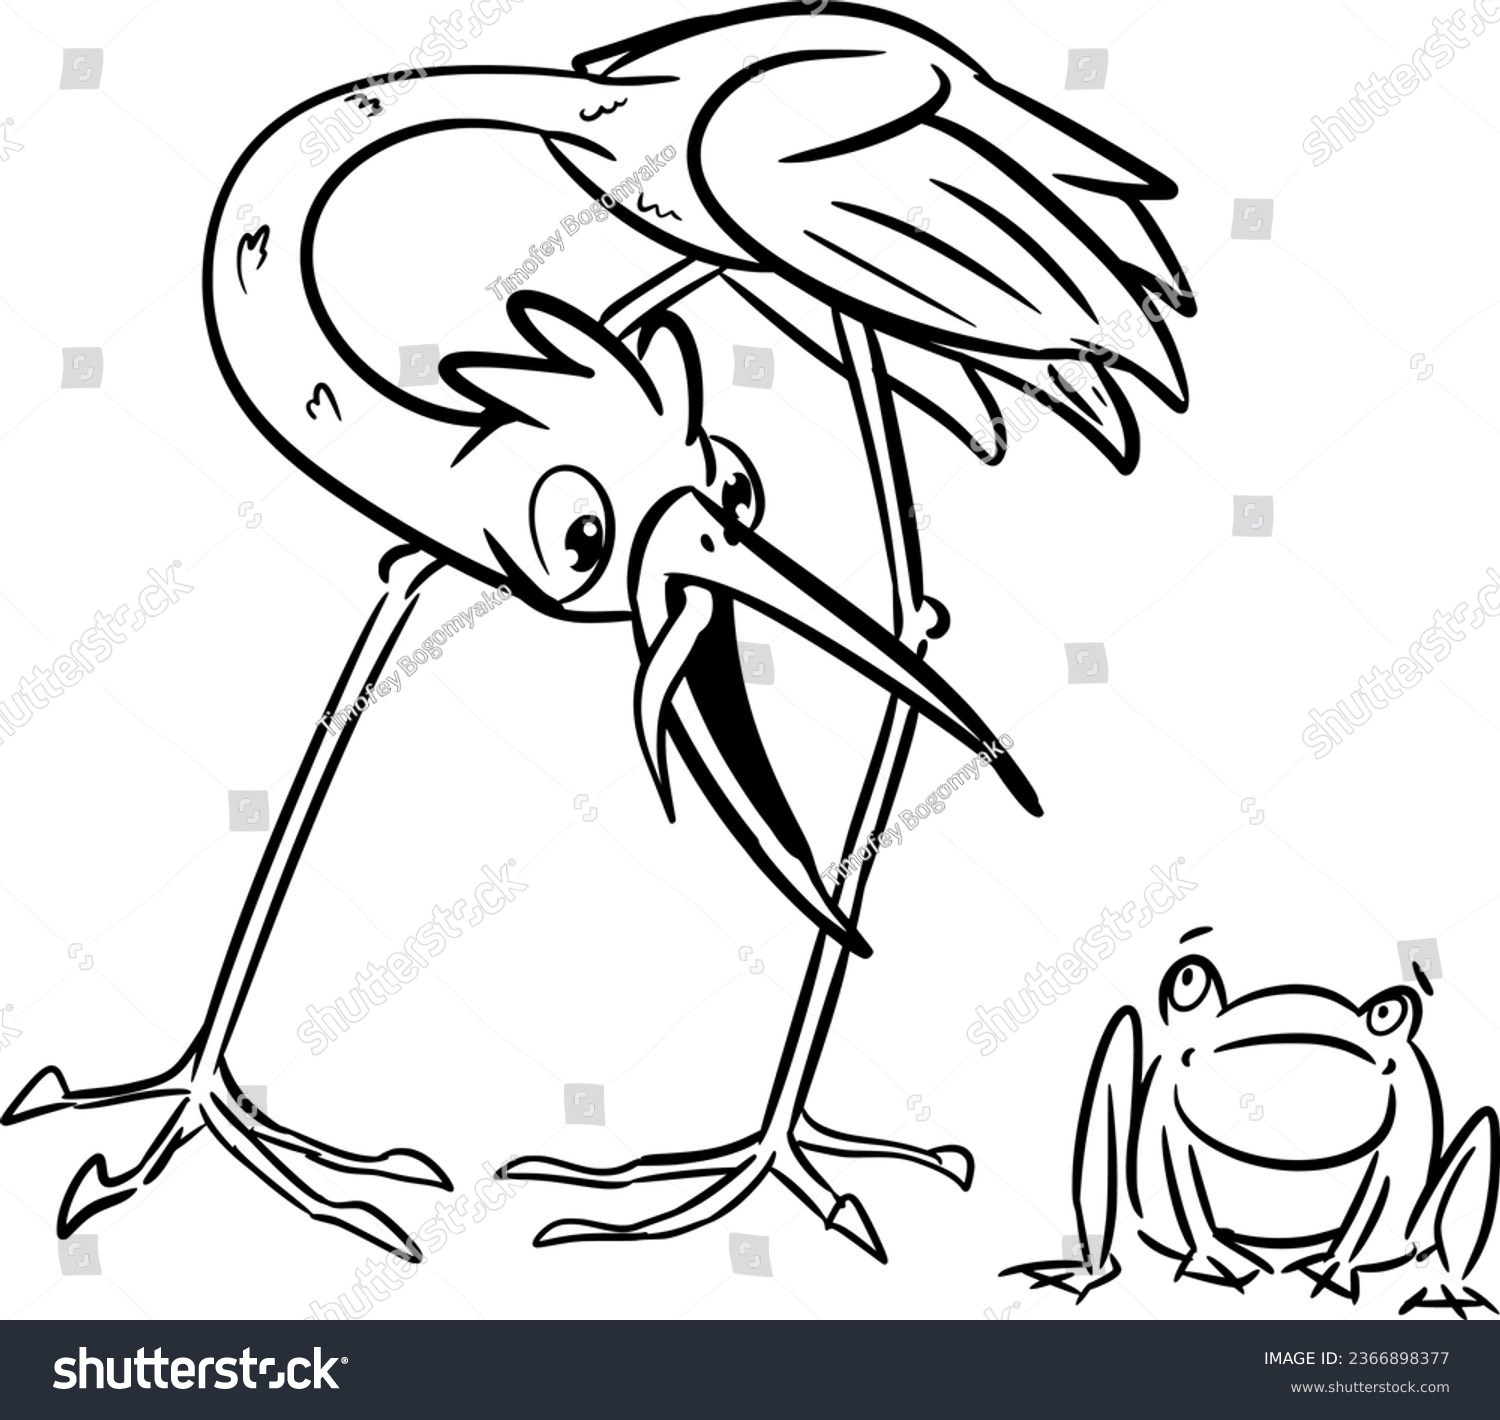 SVG of Vector drawing of big stork,egret and small frog,toad. Hand drawn, cartoon style,doodle,black and white,contour, silhouette,sketch. Animal,bird,amphibia,wild,swamp,nature,cute,silly,funny,character. svg